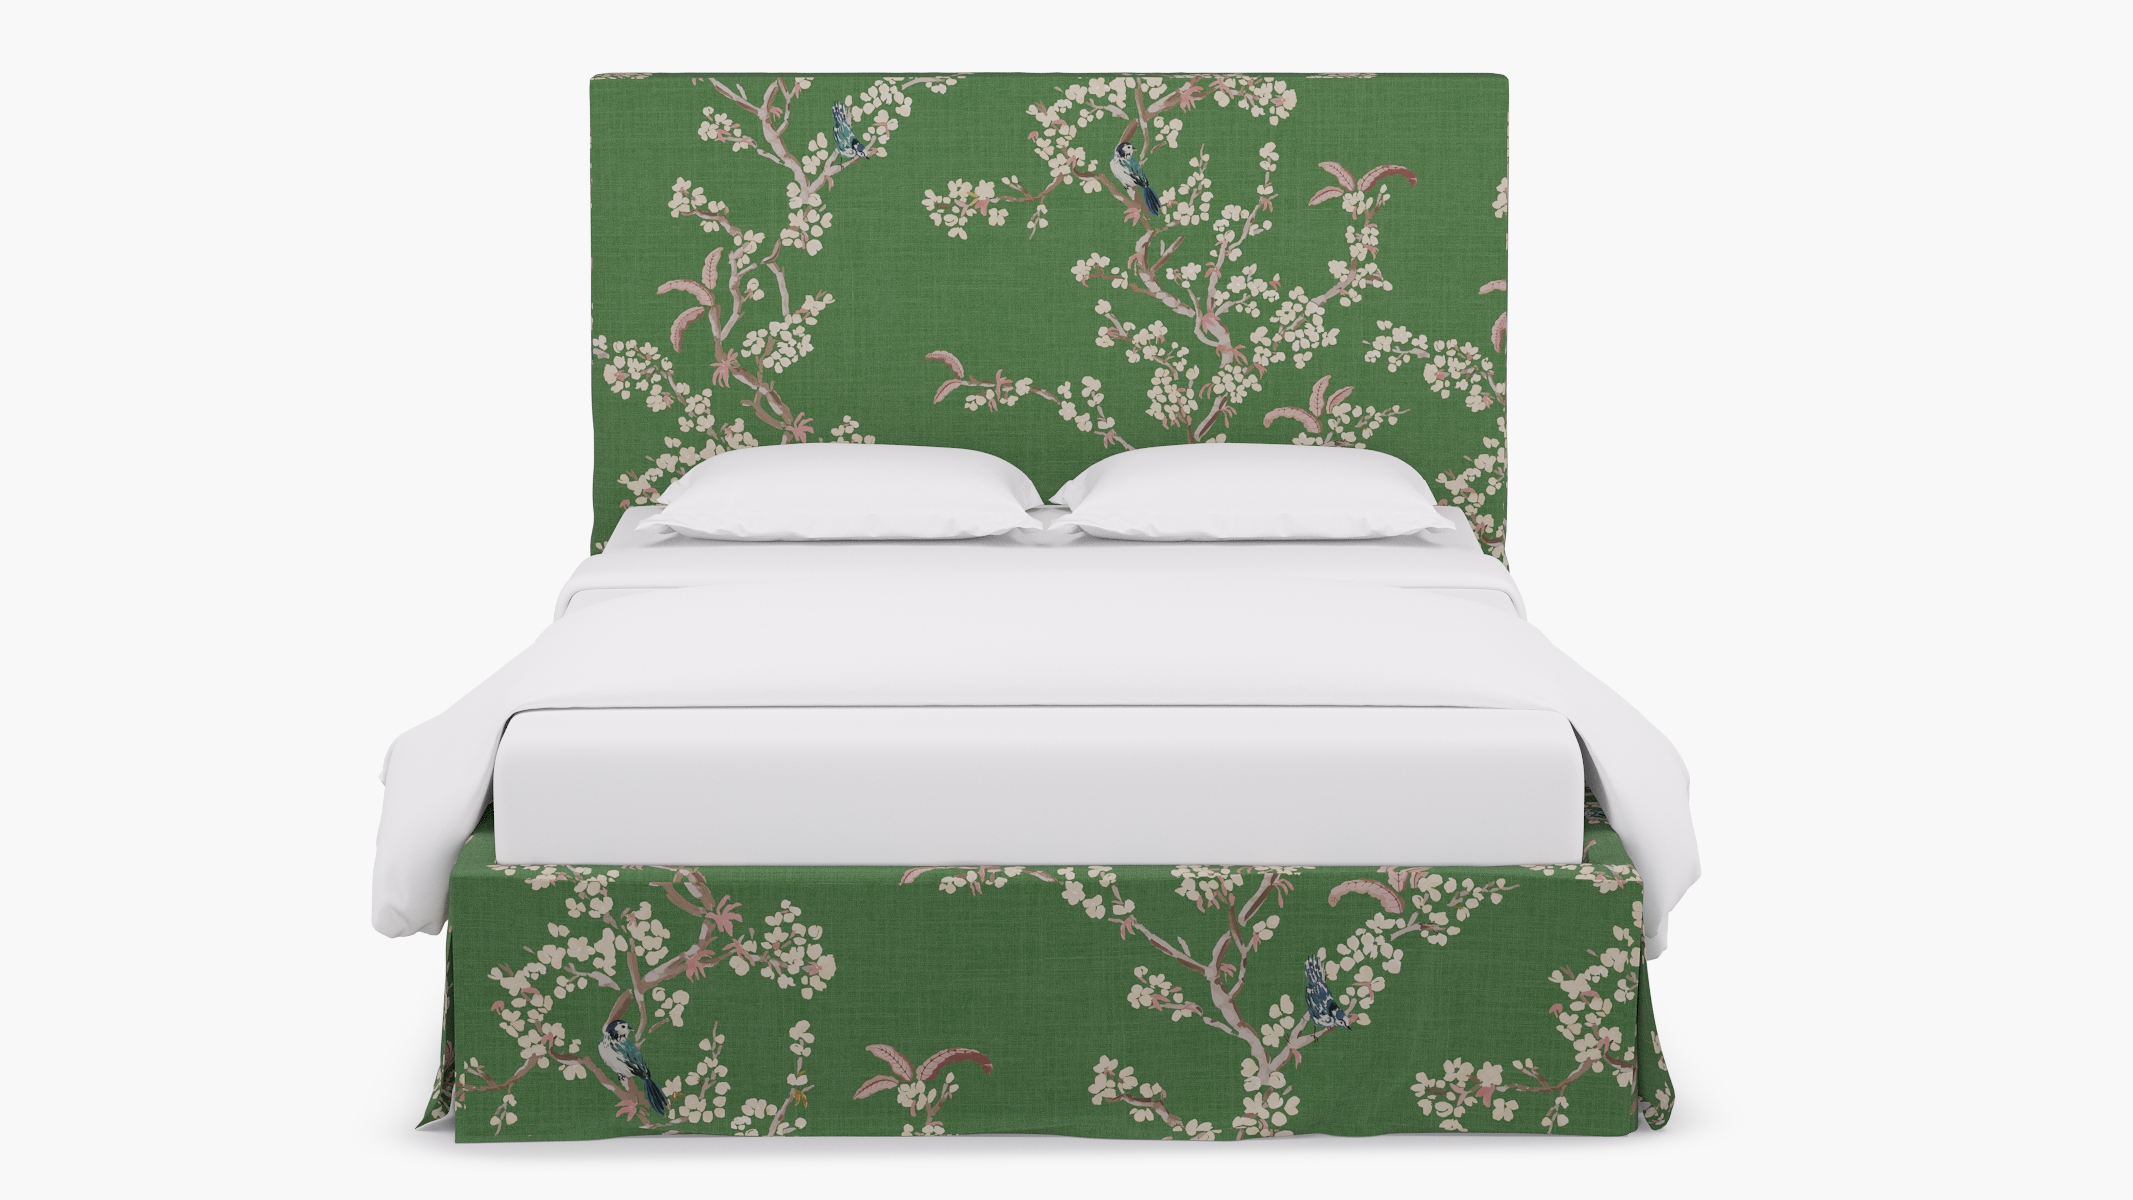 Slipcovered Bed, Jade Cherry Blossom, Queen - Image 0